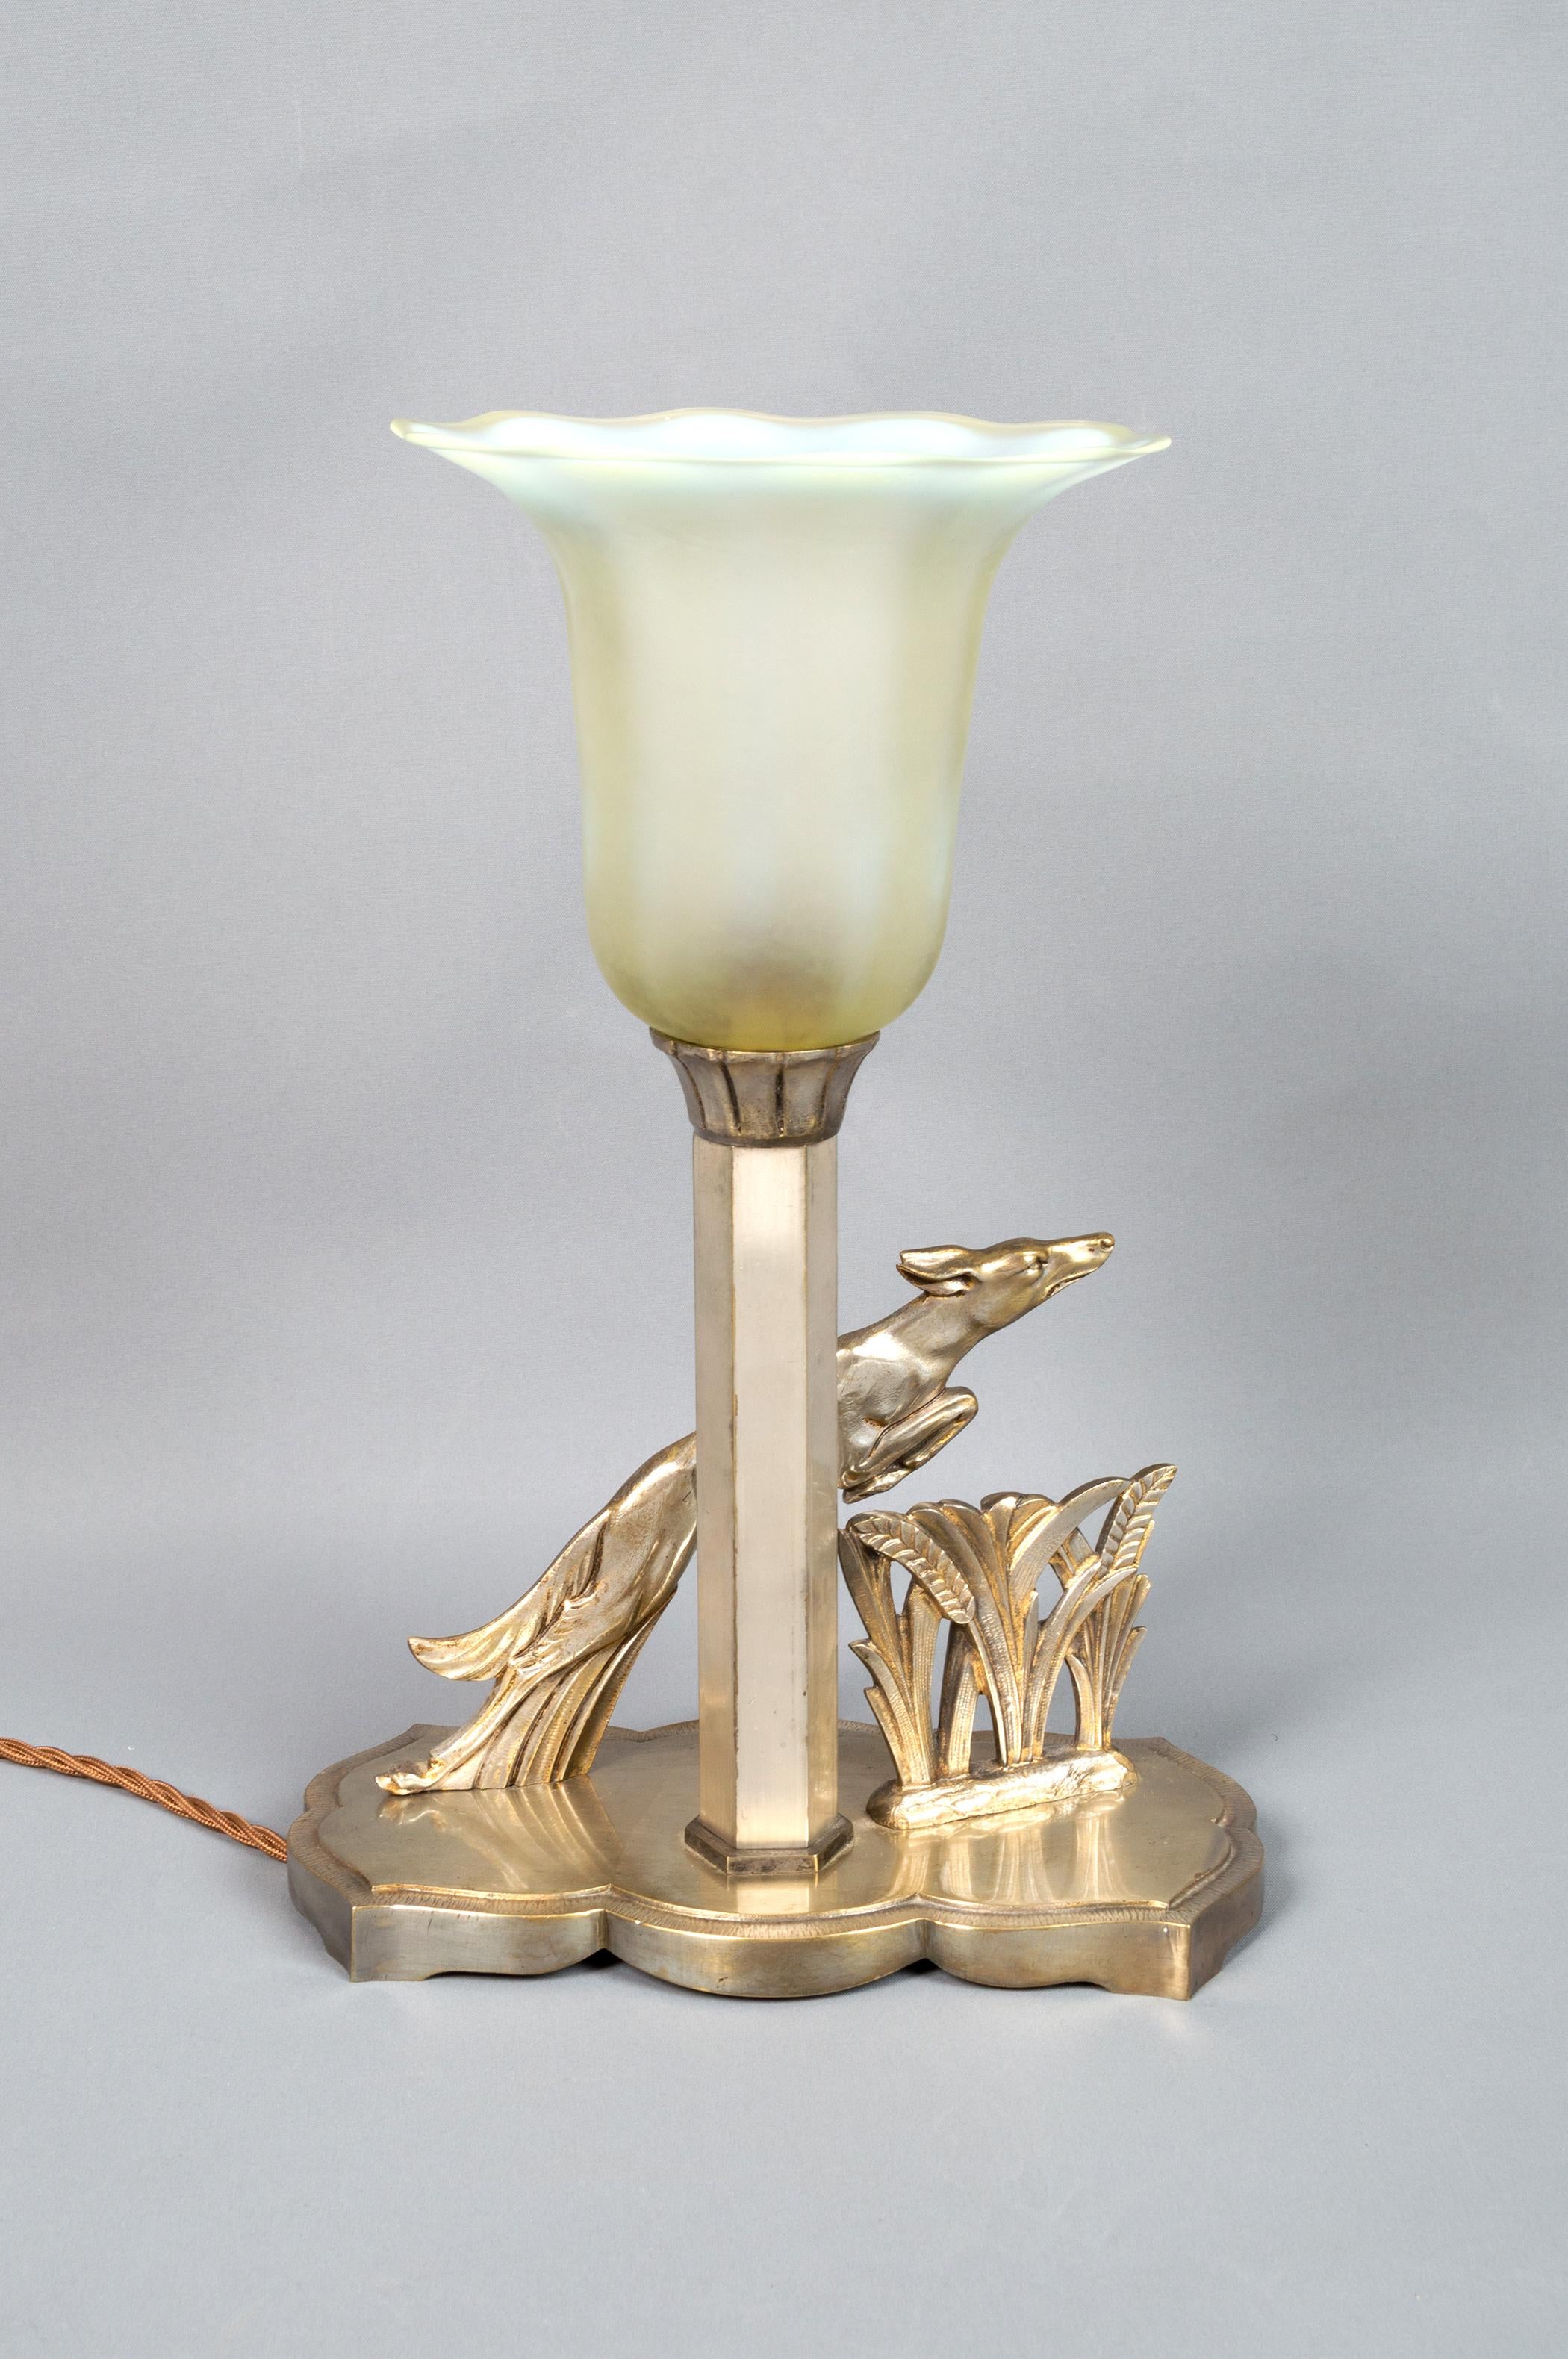 French Art Deco Chrome and Glass 'Leaping Hound' Table Lamp Desk Lamp C.1930 For Sale 3